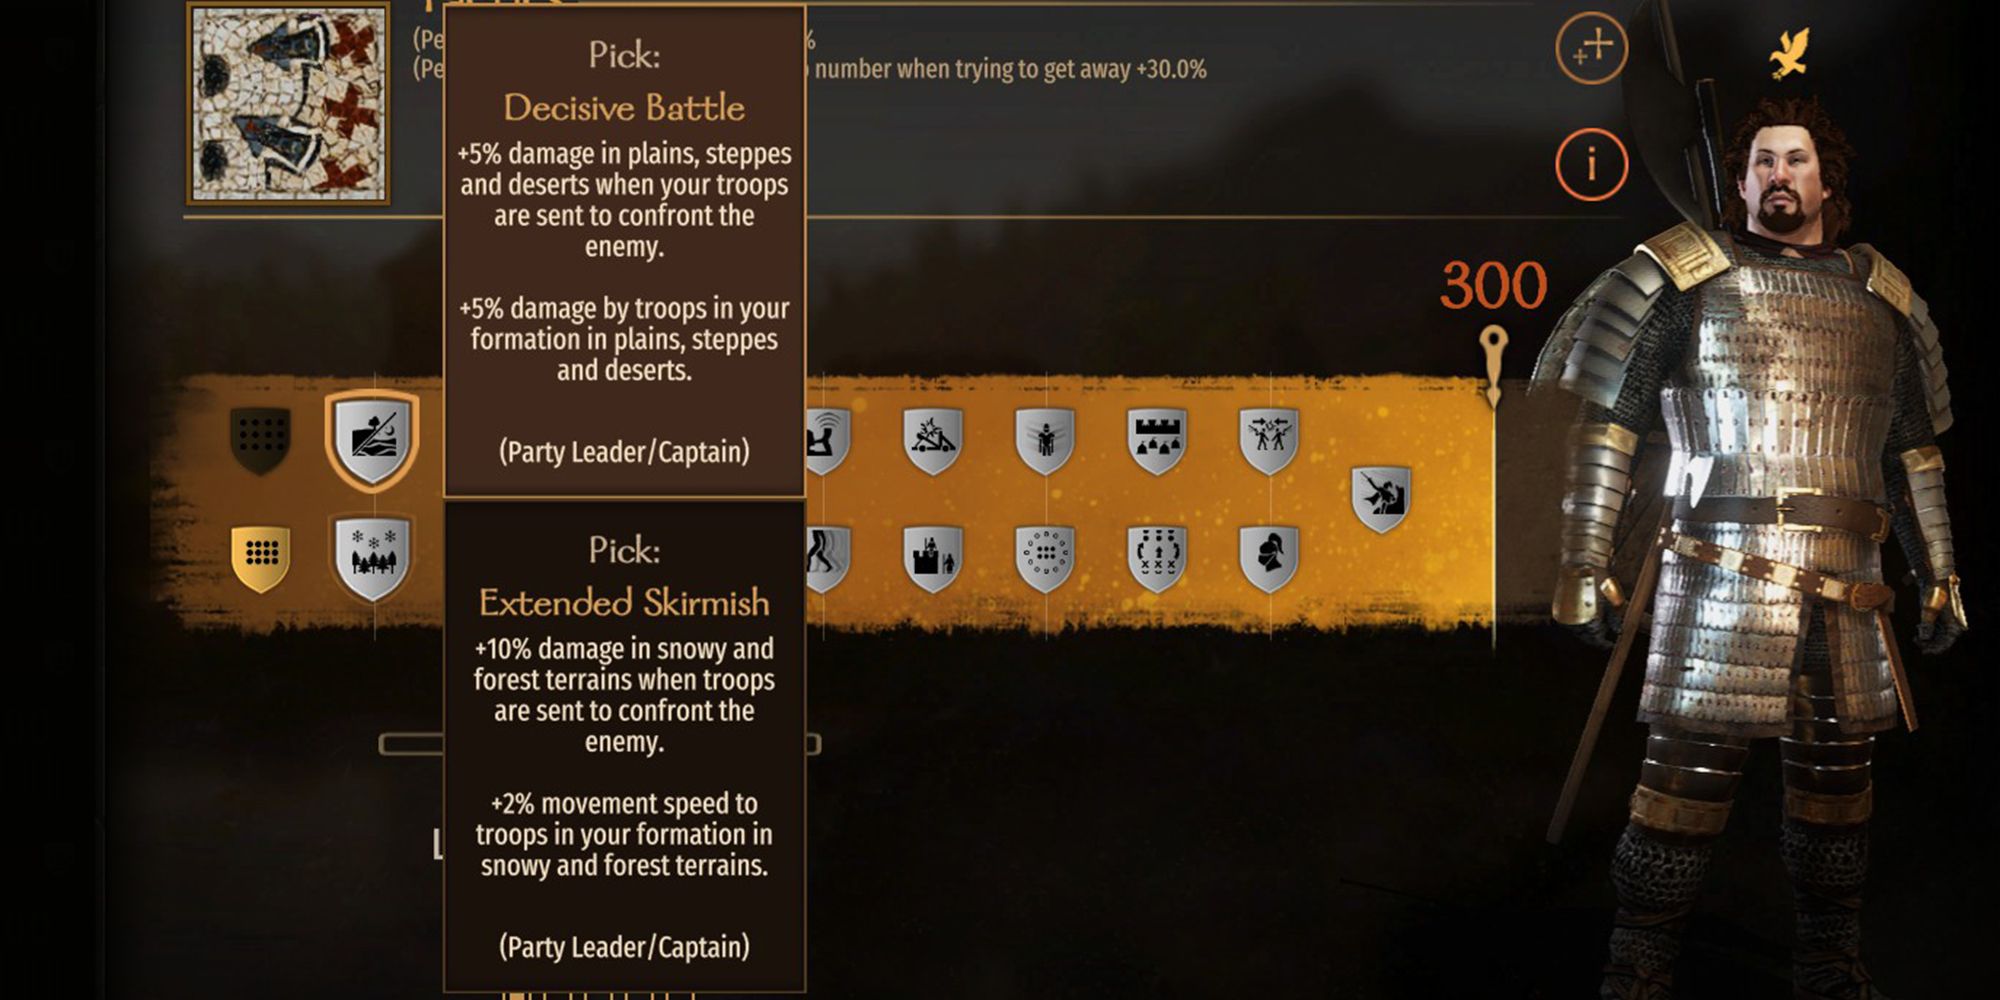 Tactics Decisive Battle Perk Menu Description +5% damage when sending troops to face enemies in plains, steppes and deserts.  +5% damage by units in formation on plains, grasslands and deserts.